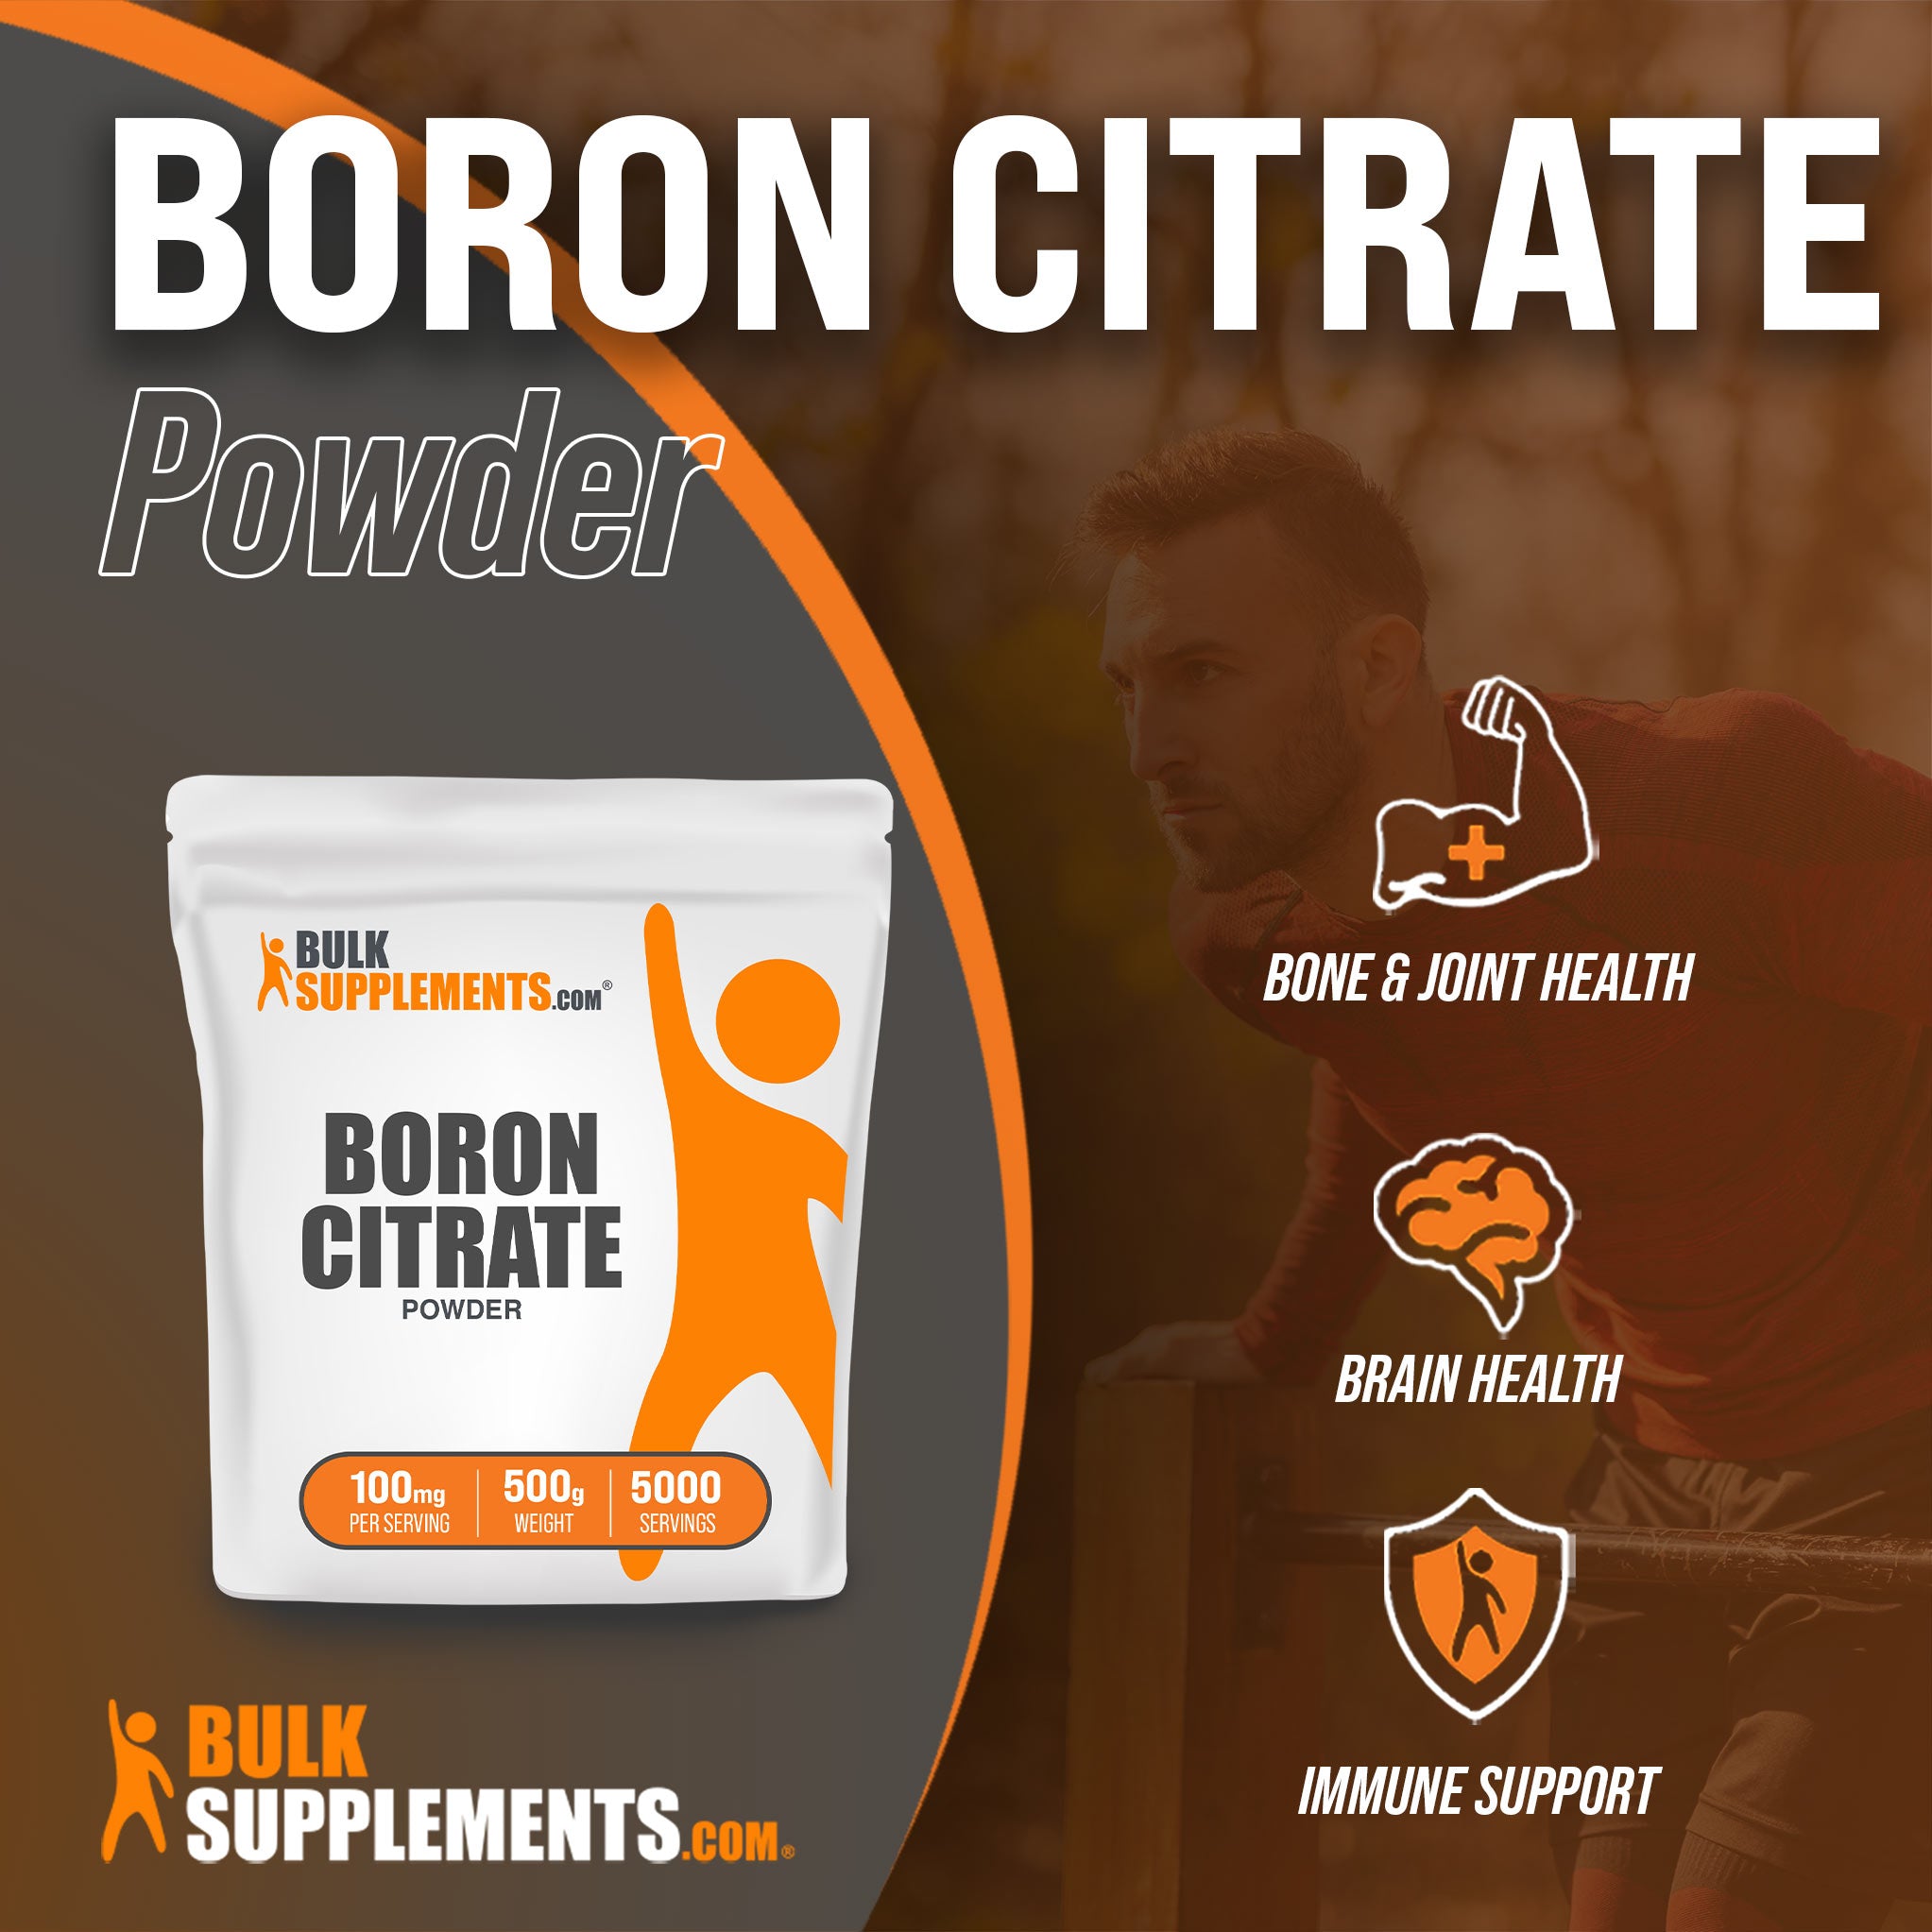 500g of Boron Citrate: 100mg Servings